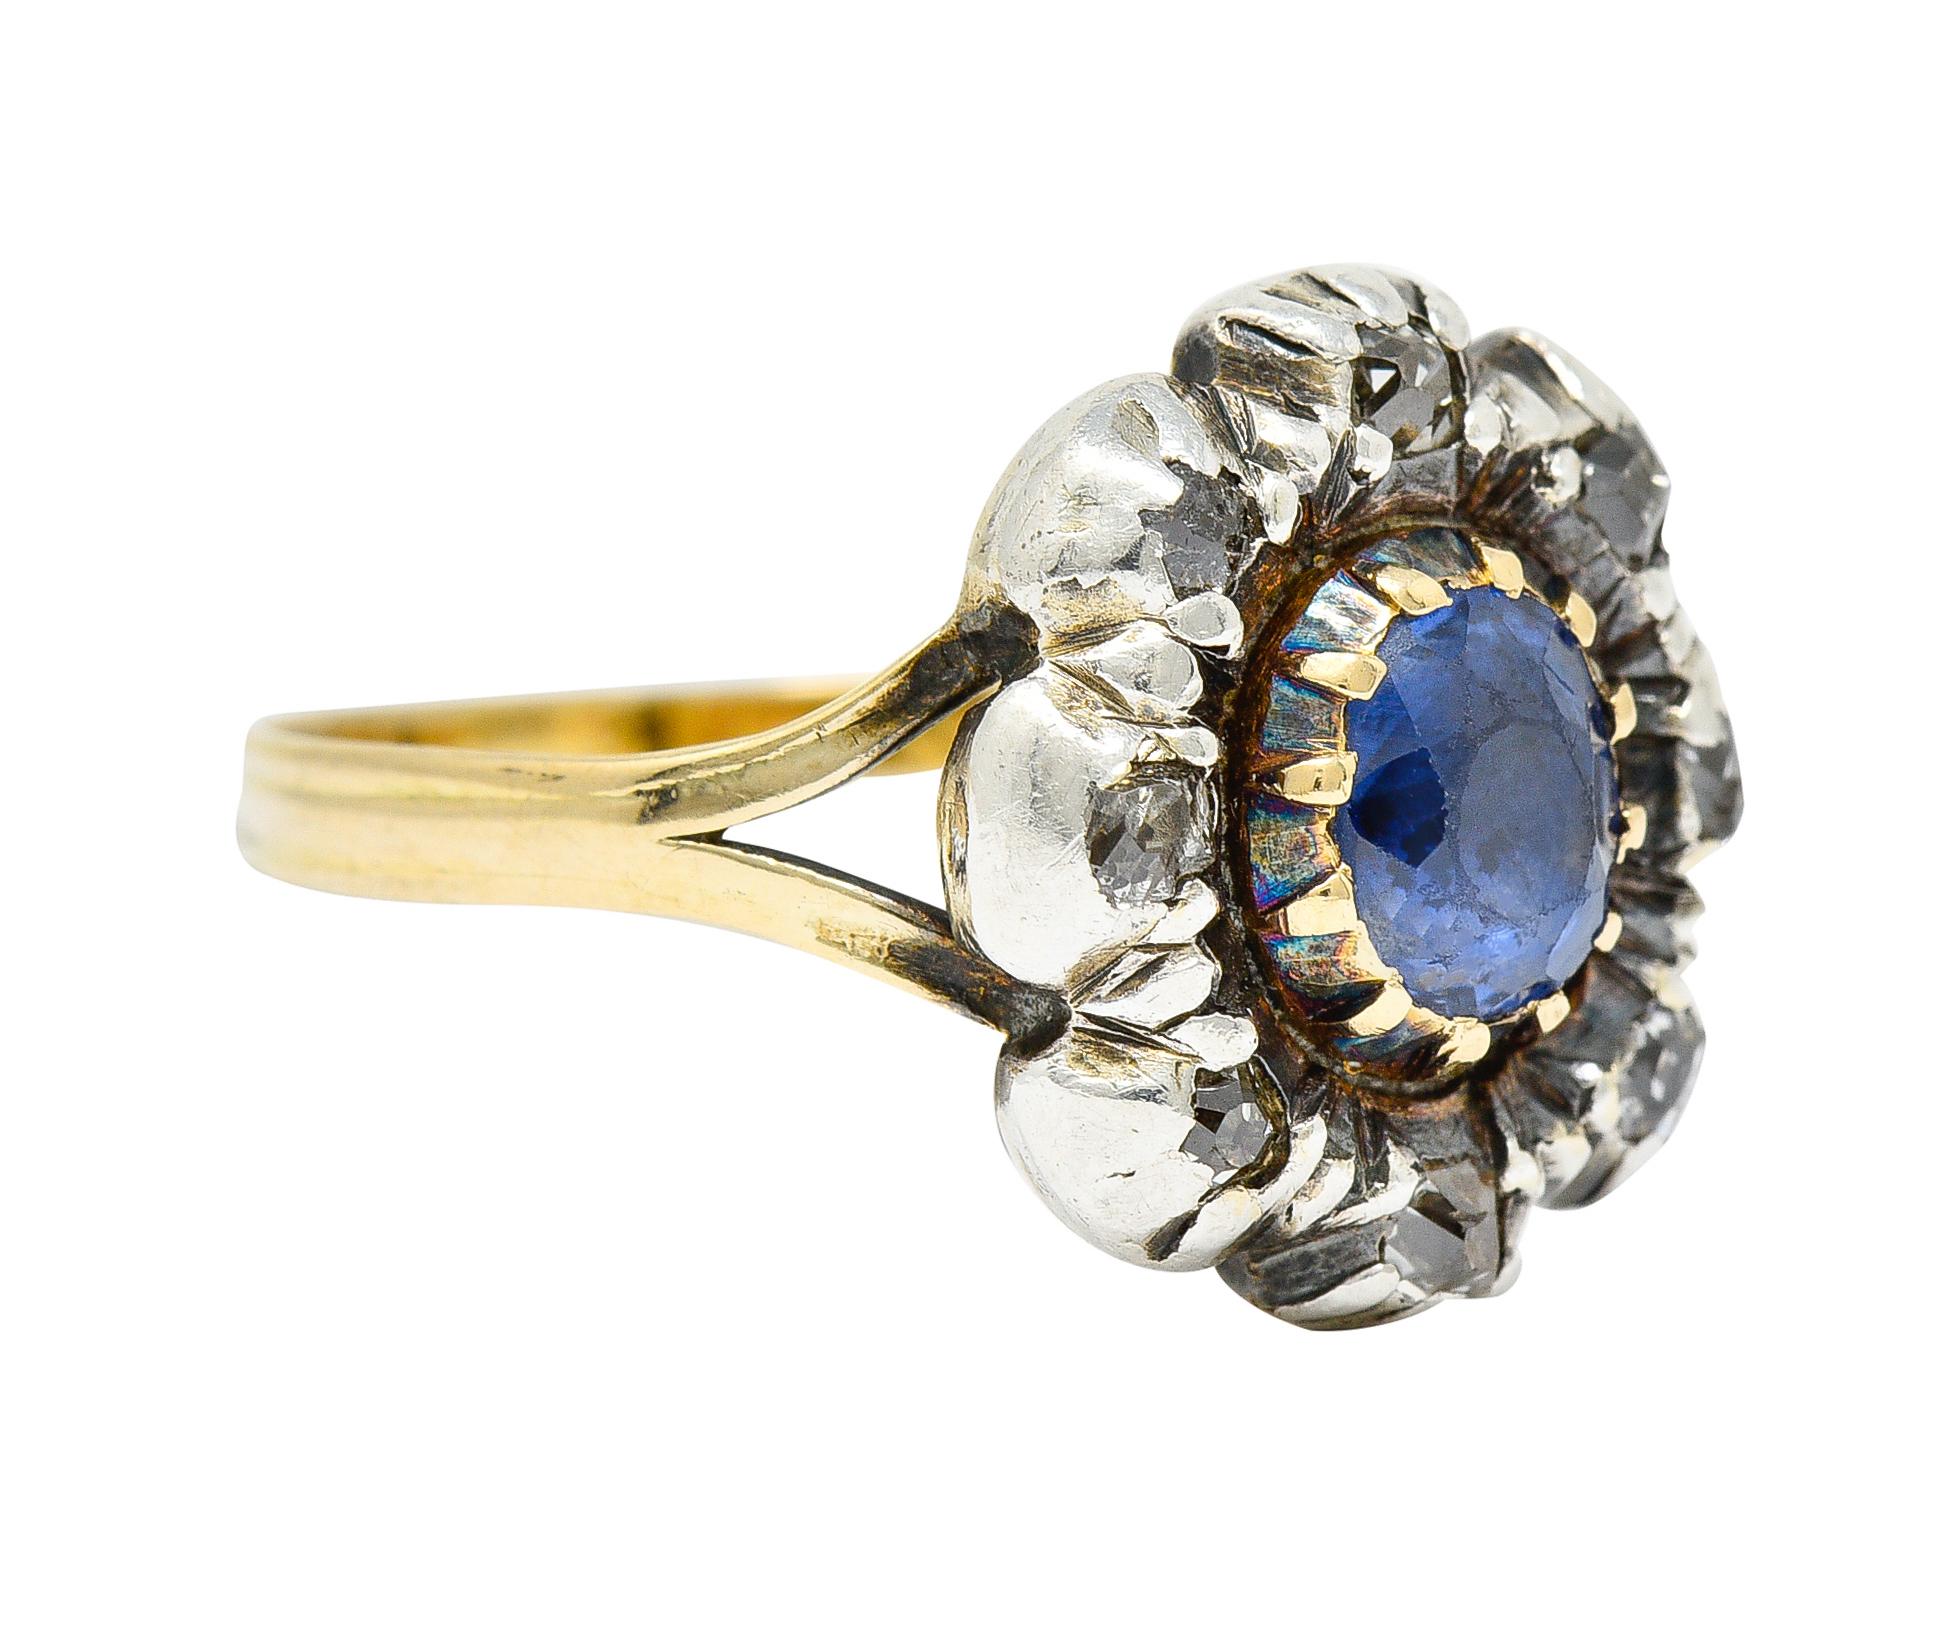 Floral cluster style ring centers an oval cut sapphire weighing approximately 0.90 carat

Set in gold with strongly violetish-blue color - foil backed

Surrounded by a halo of table cut diamonds weighing approximately 0.40 carat - set in